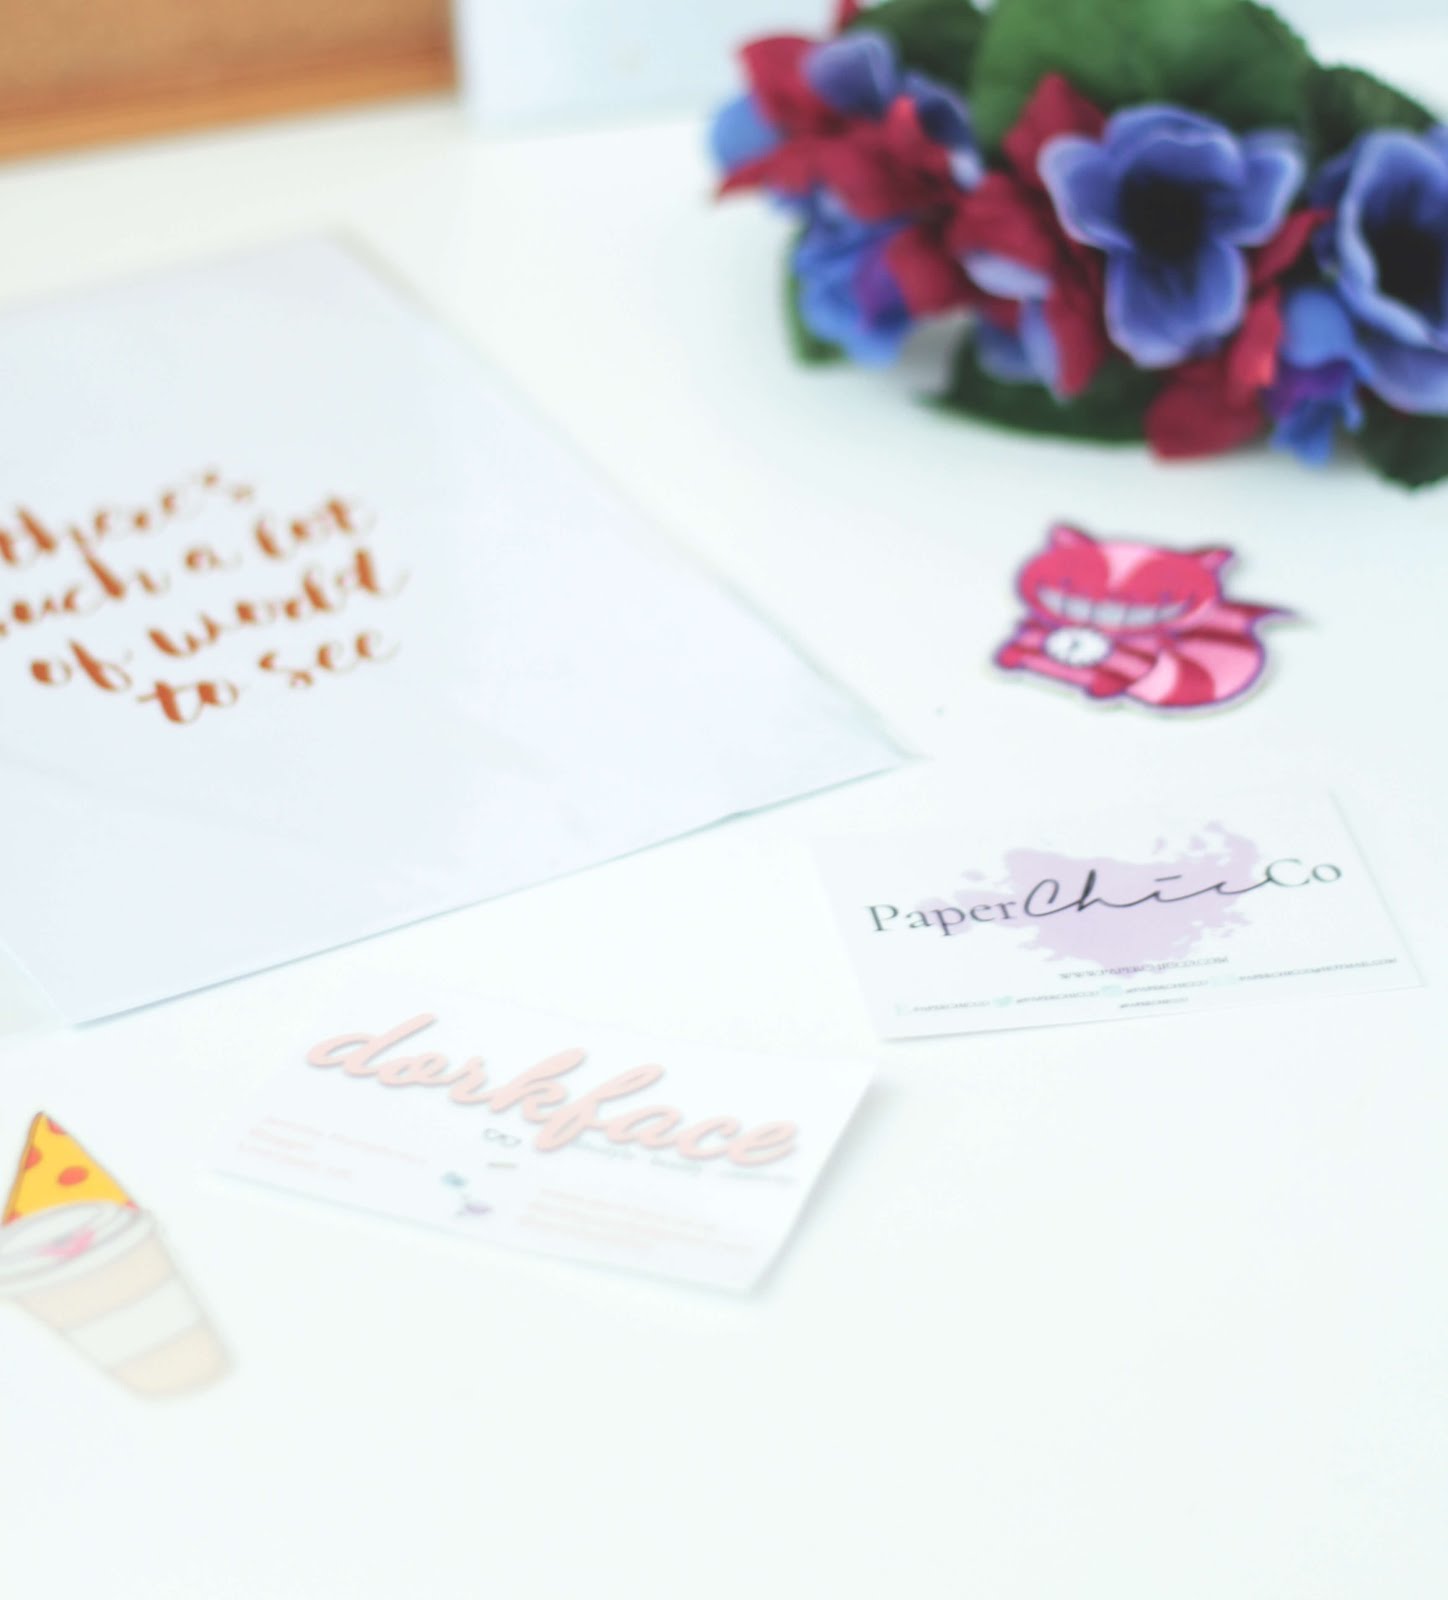 blogger favourite recommended indie brands small businesses